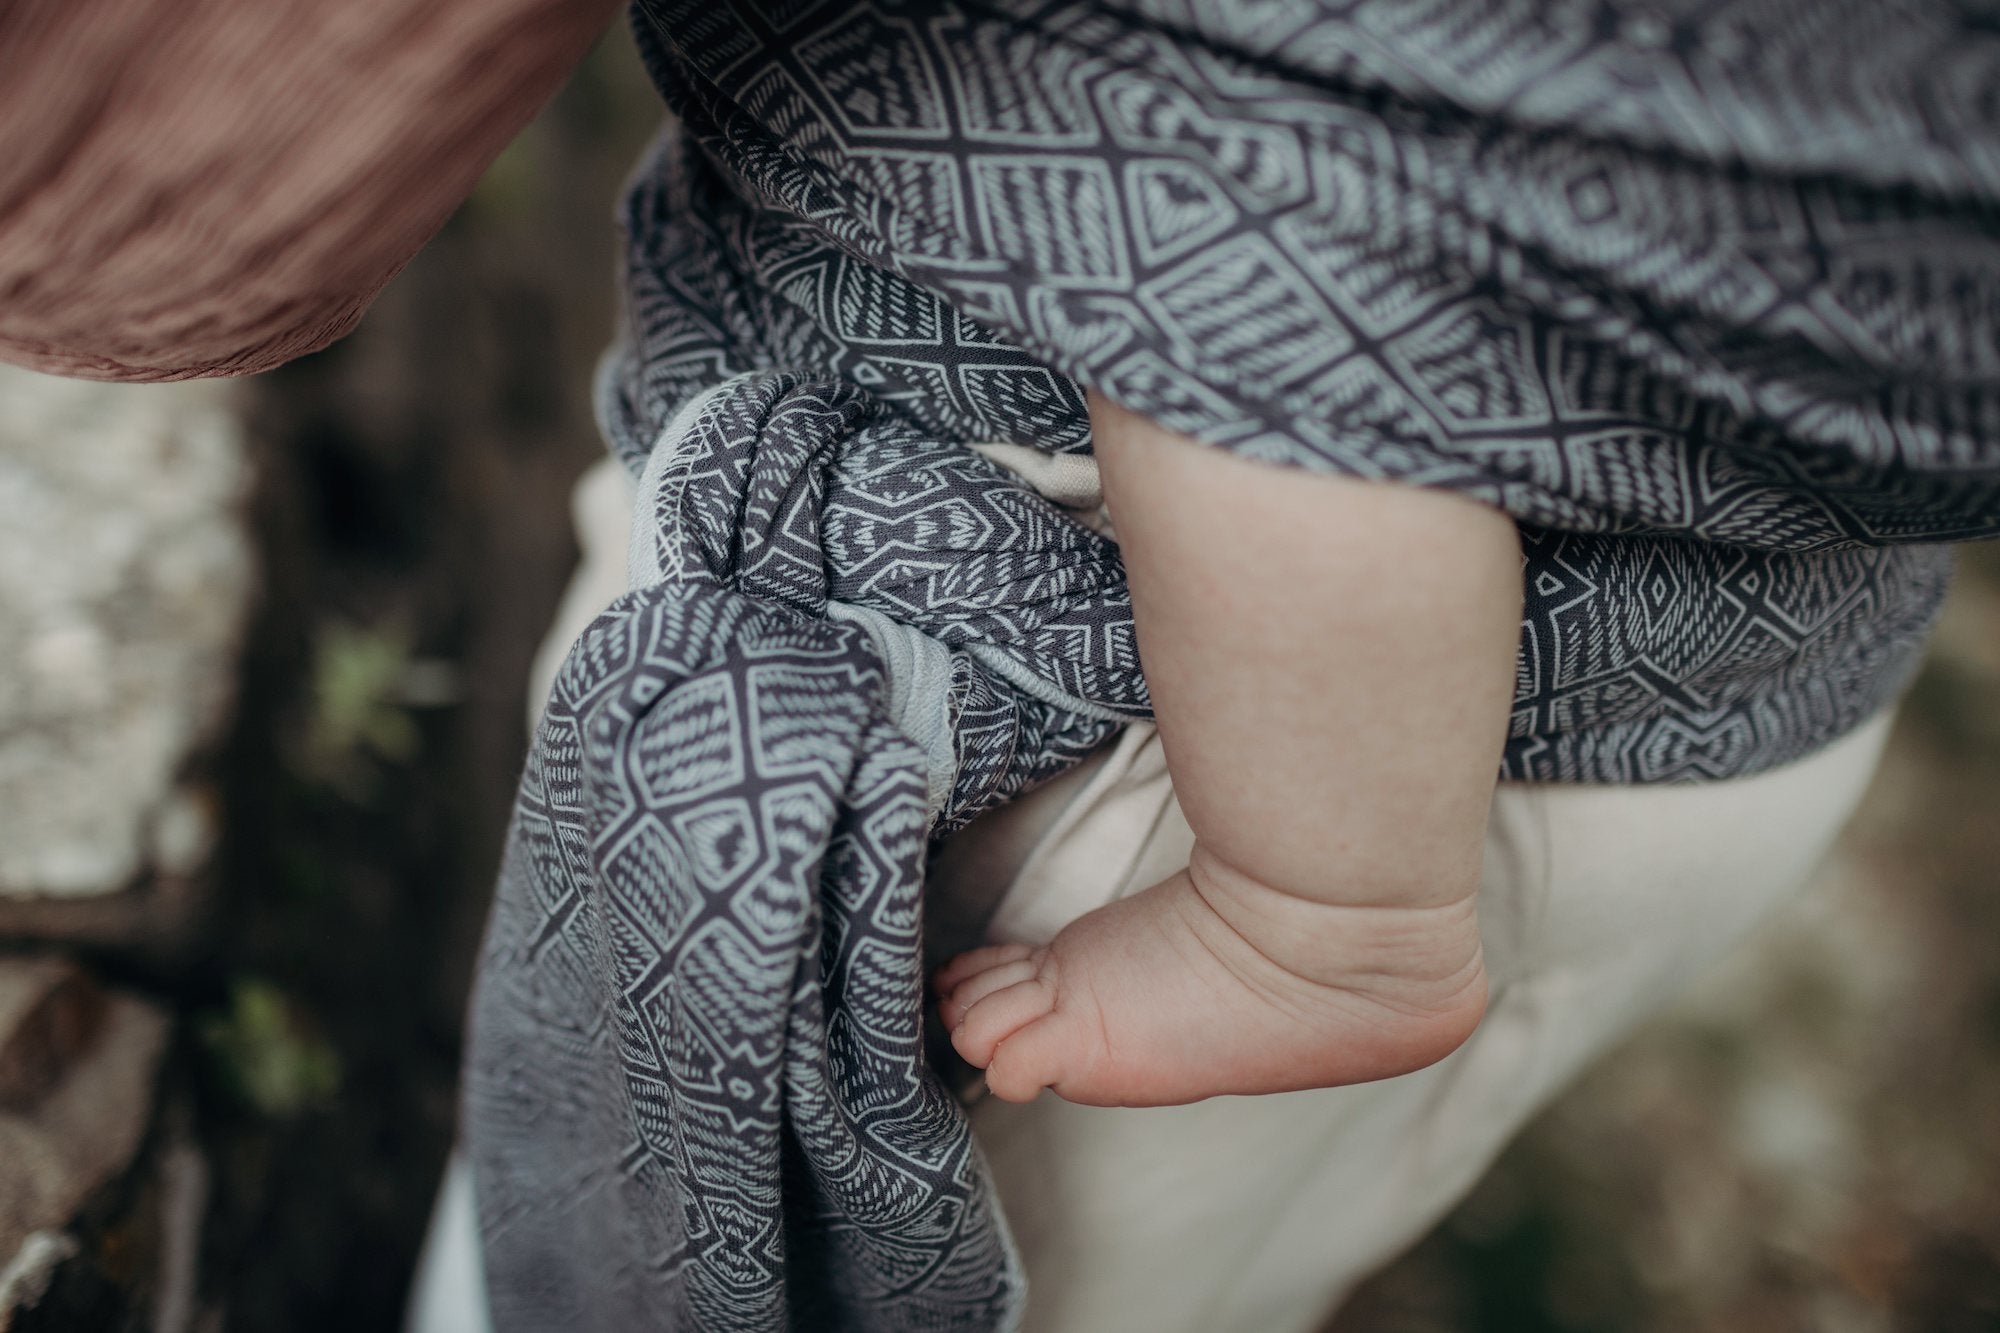 Keep your baby cozy and comfortable wherever you go with Boba's Classic Wrap Kahla! Made of a 95% French Terry cotton blend and ergonomically designed, this one-size-fits-all wrap provides maximum comfort for parents and is certified hip-healthy for your little one.